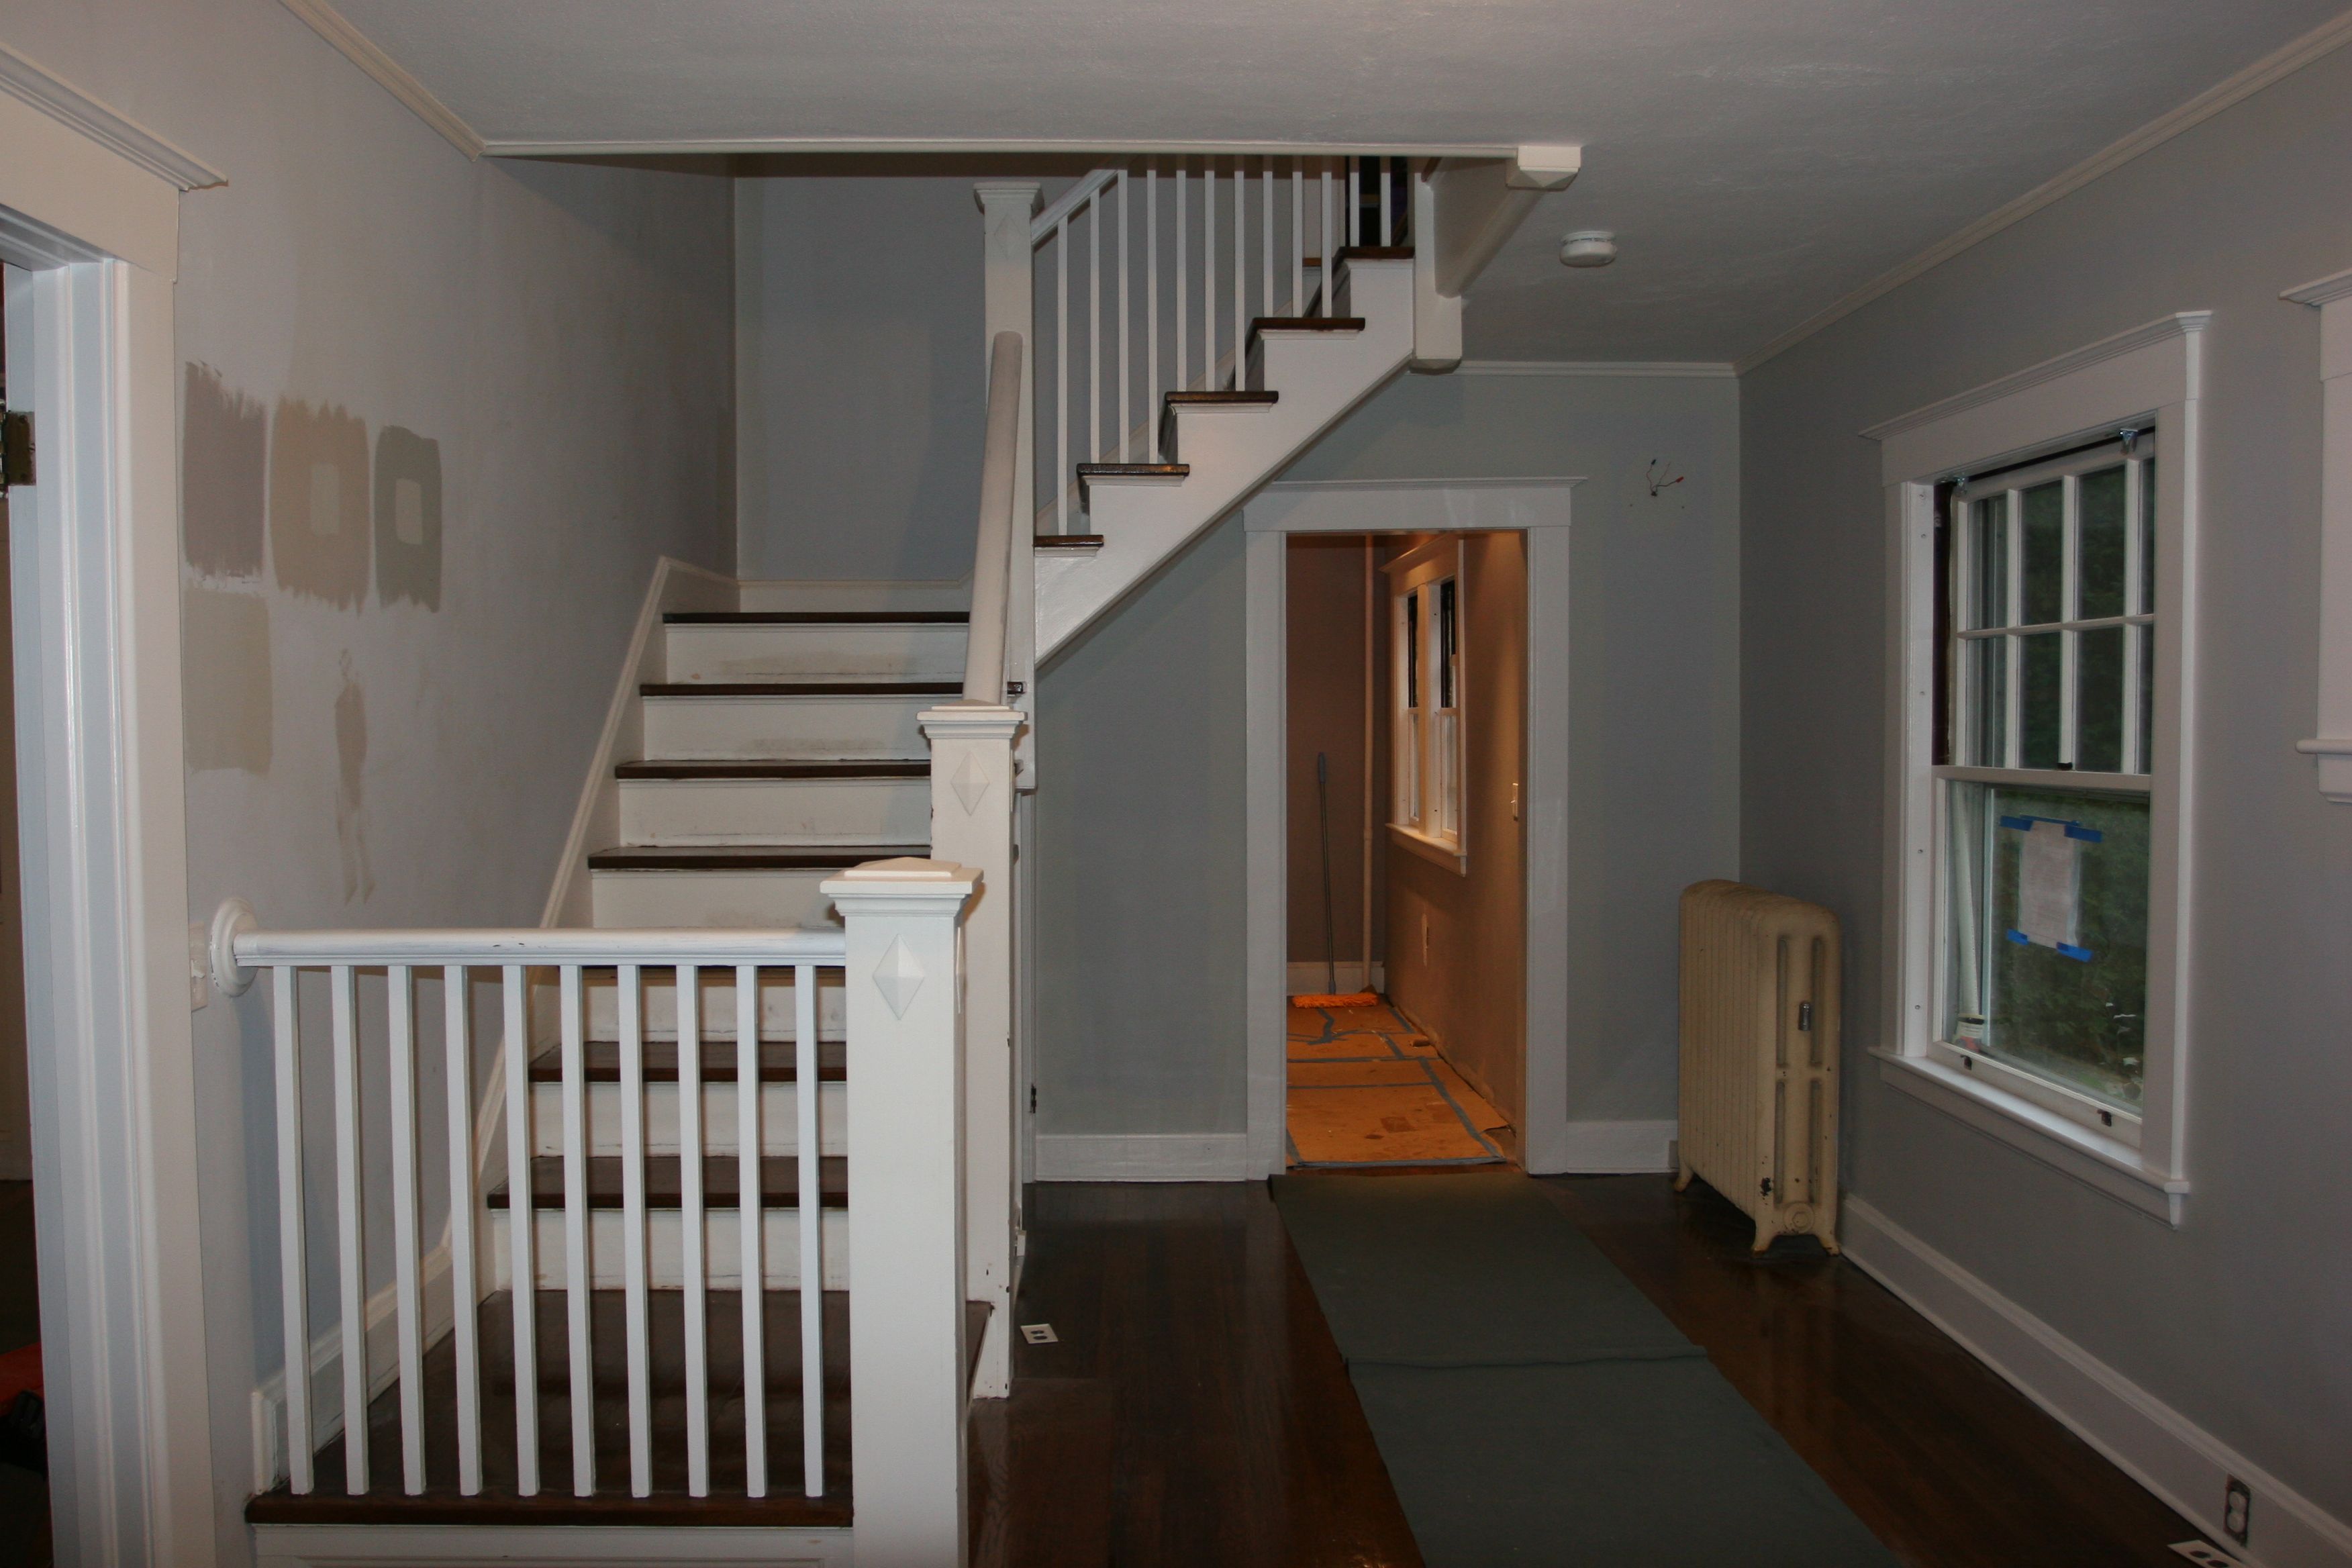 The banister has a primer coat on it, the balustrade is painted, and the walls are edged. Almost there!